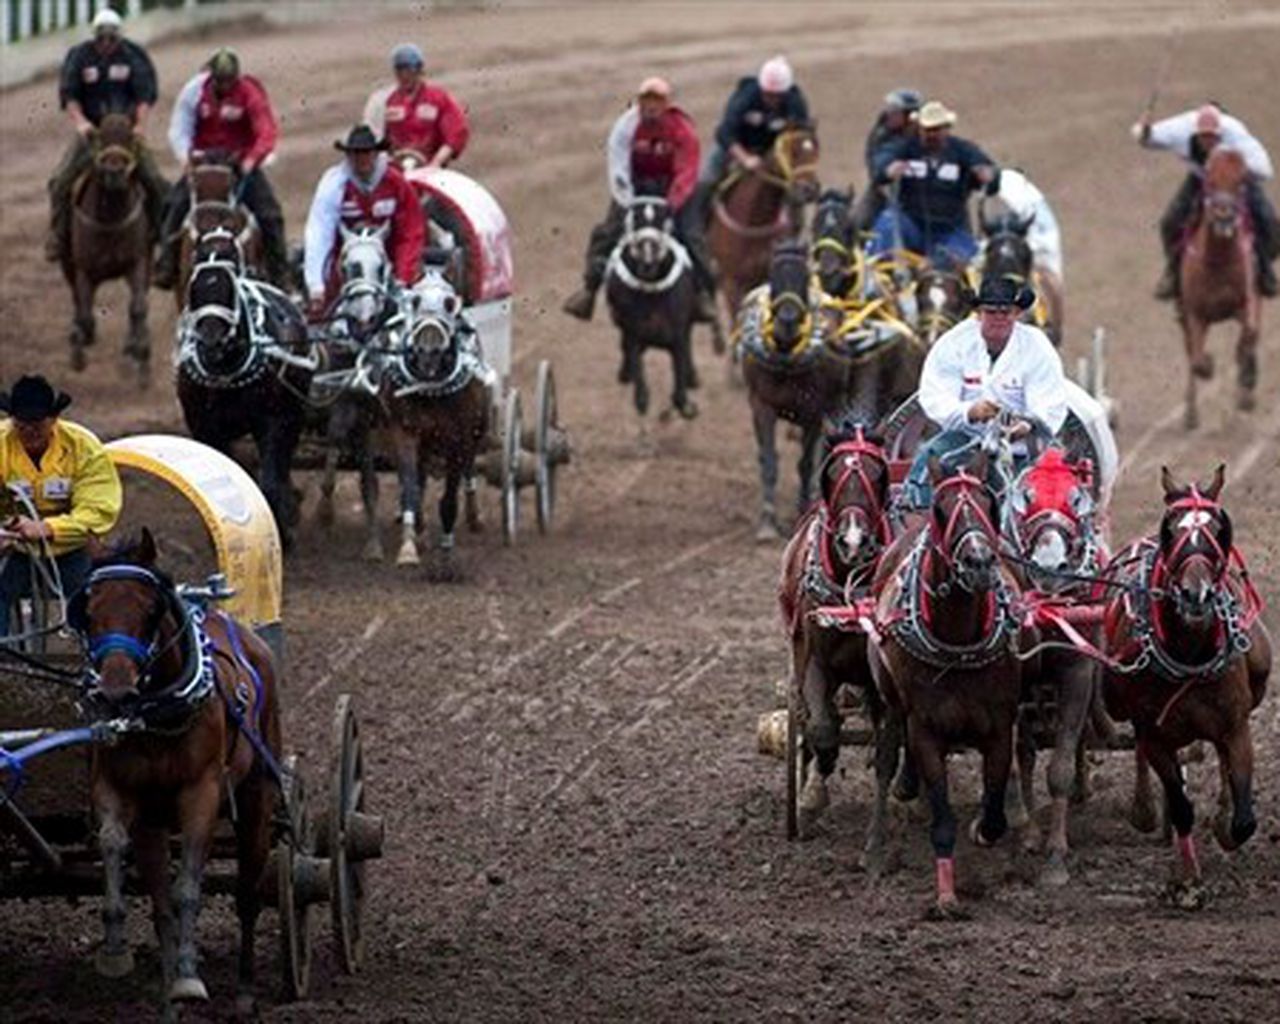 Chuckwagon race safety up for review after six horses die during Stampede event